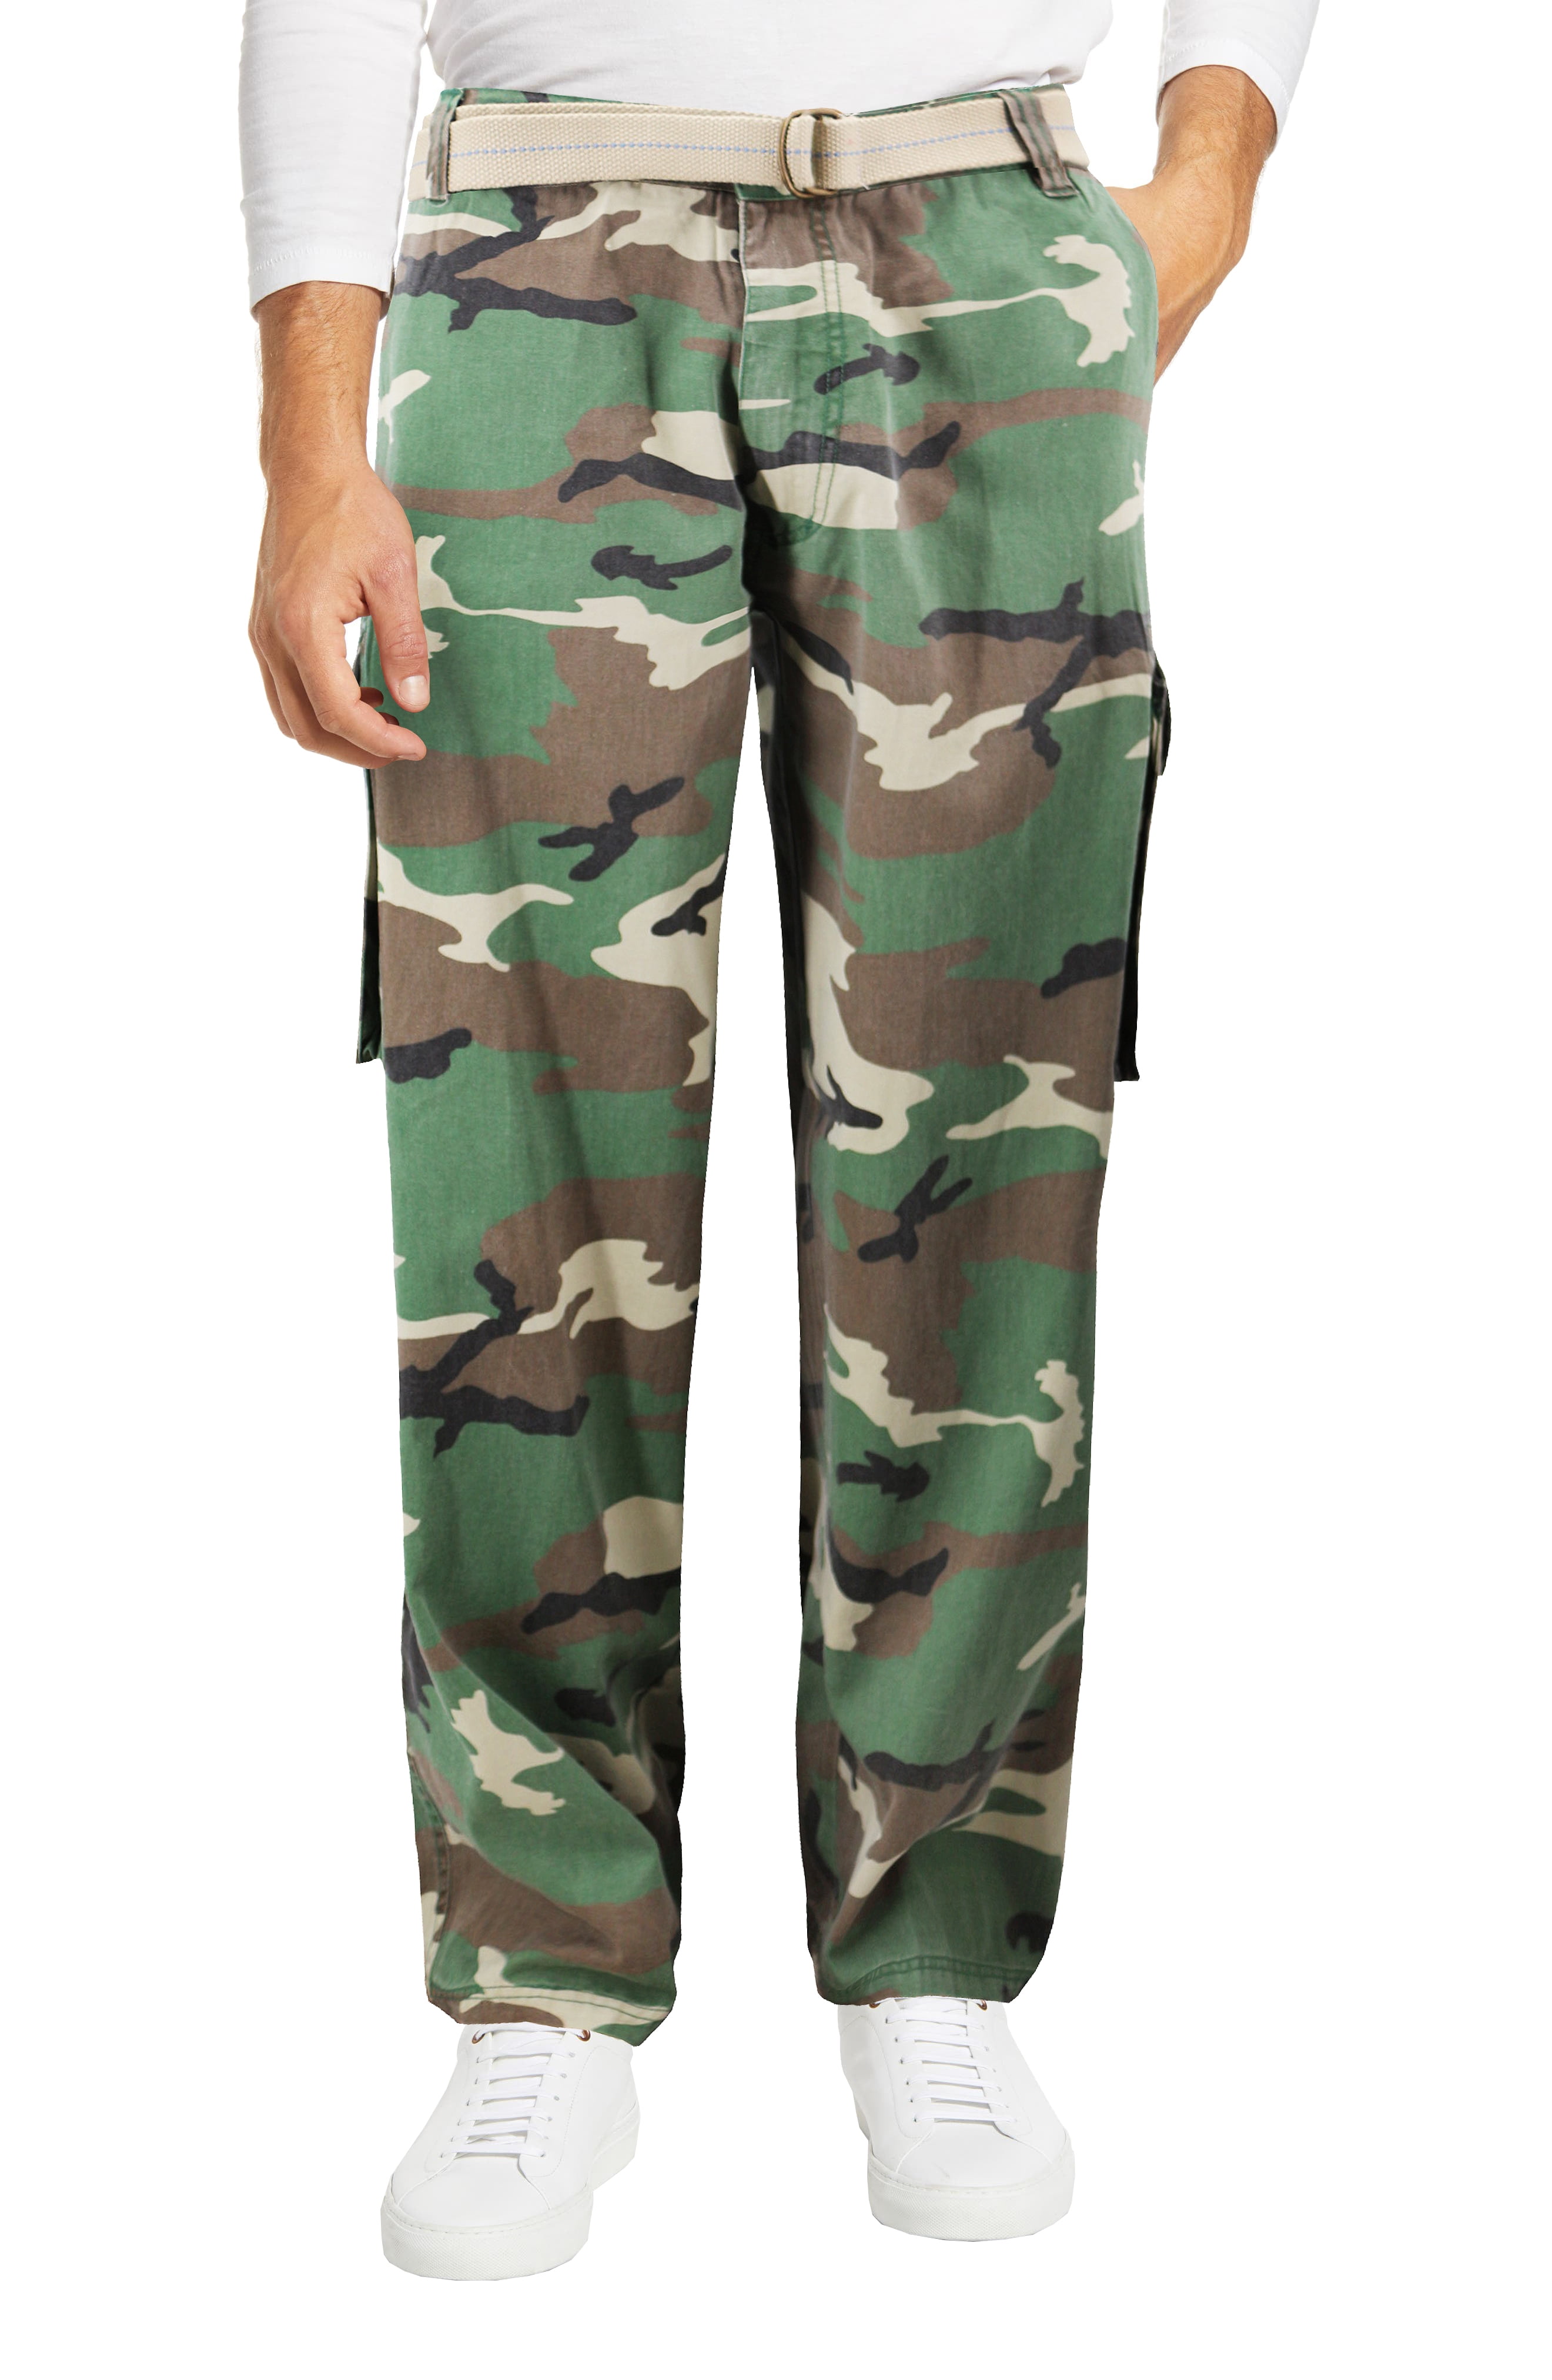 Men Military Combat Army Trousers Camouflage Cargo Pocket Camo Casual Work Pants 